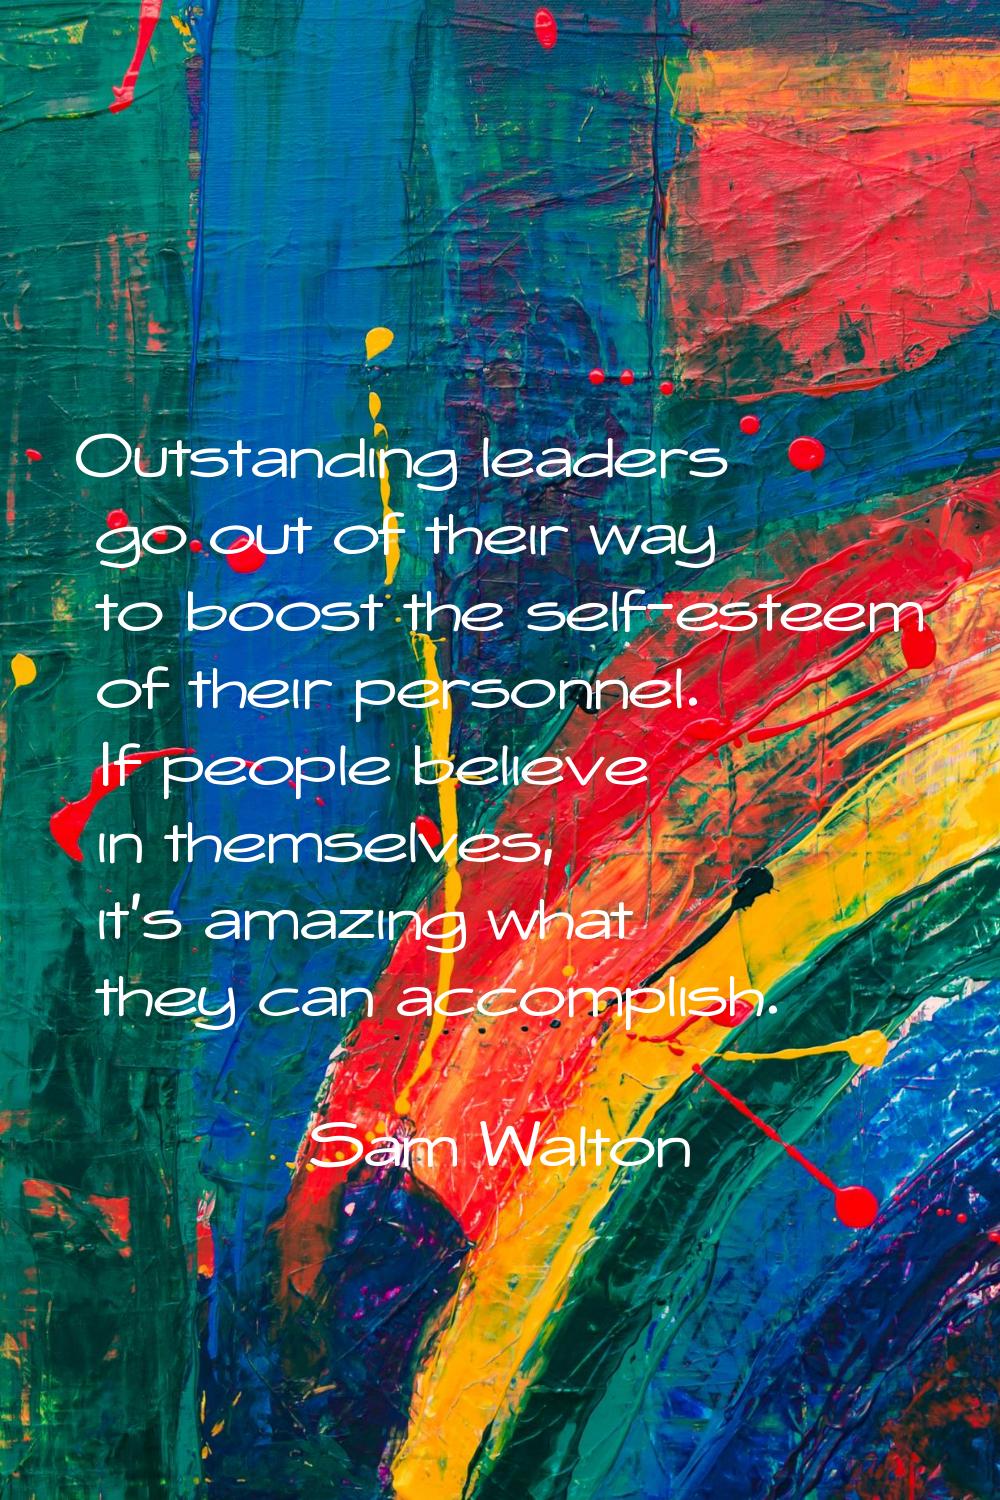 Outstanding leaders go out of their way to boost the self-esteem of their personnel. If people beli